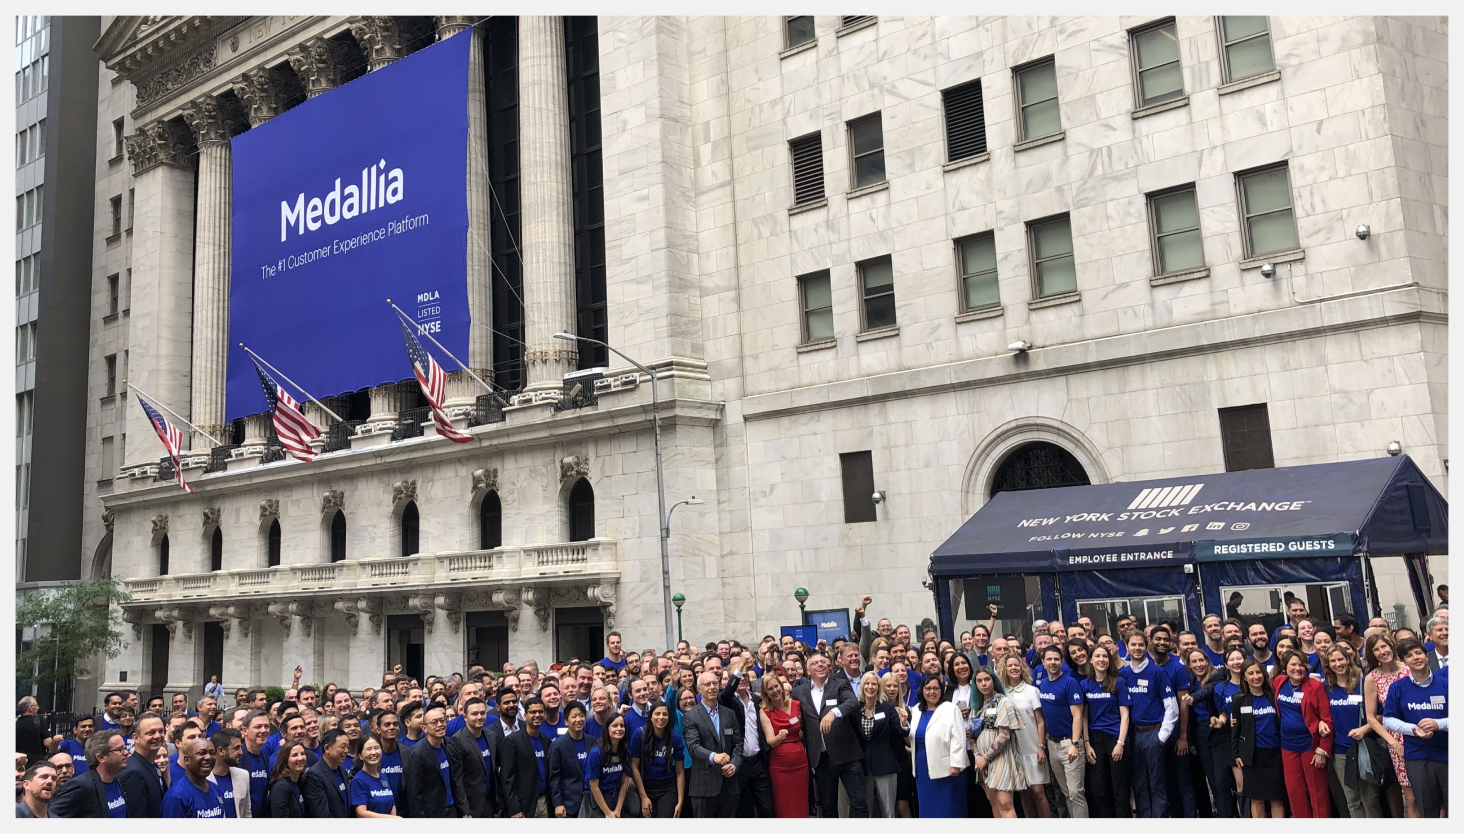 Photograph of Medallia team at the New York Stock Exchange